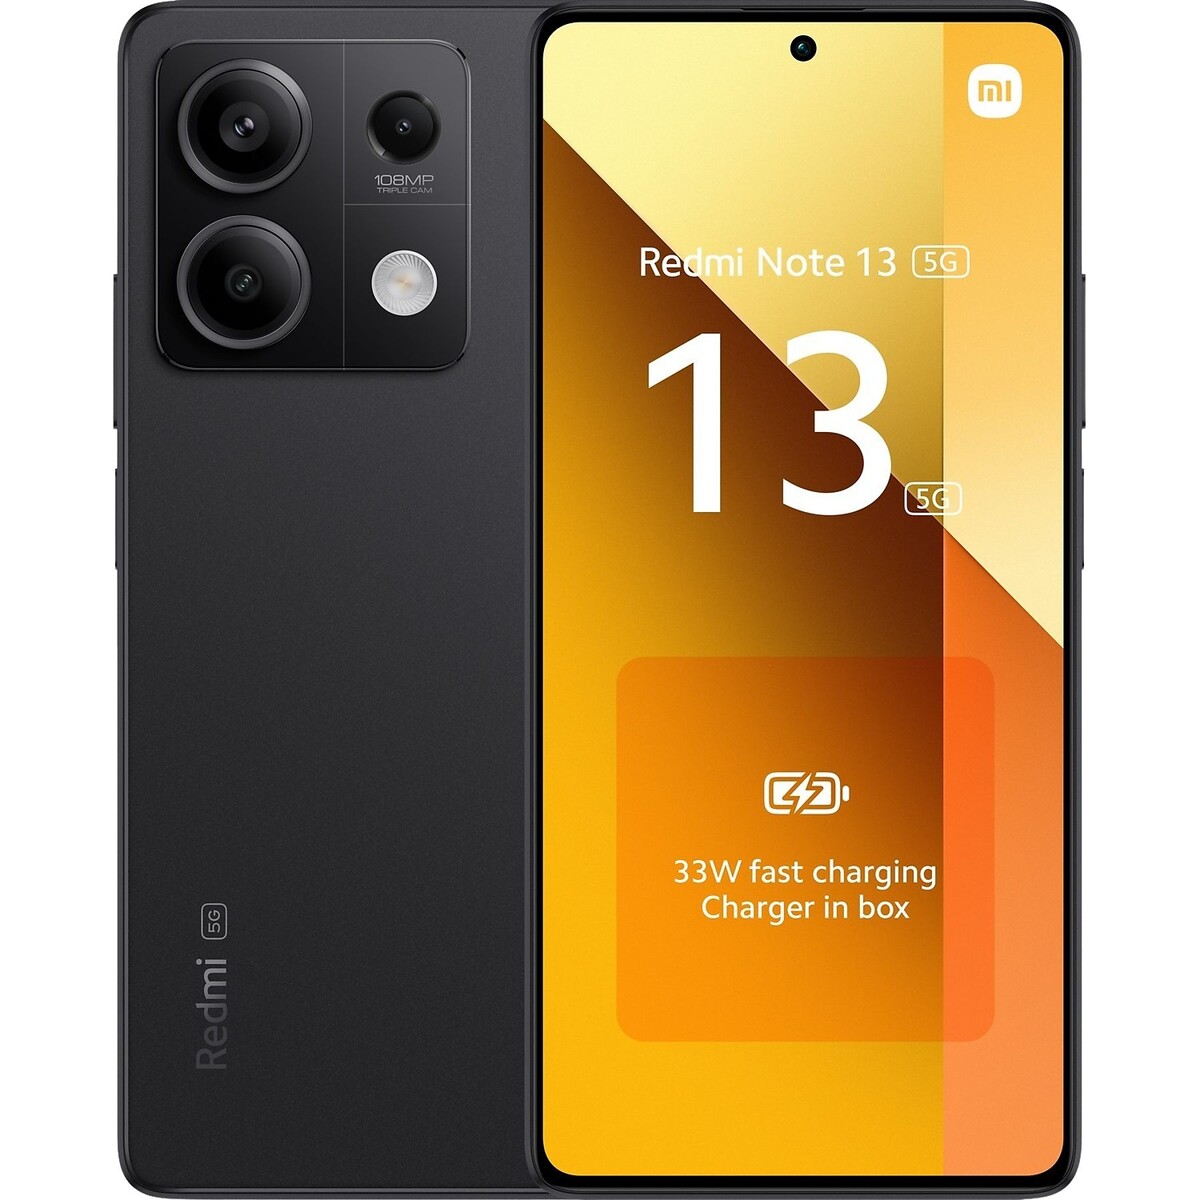 Five Redmi Note 13 models for the global market have surfaced in  high-quality images